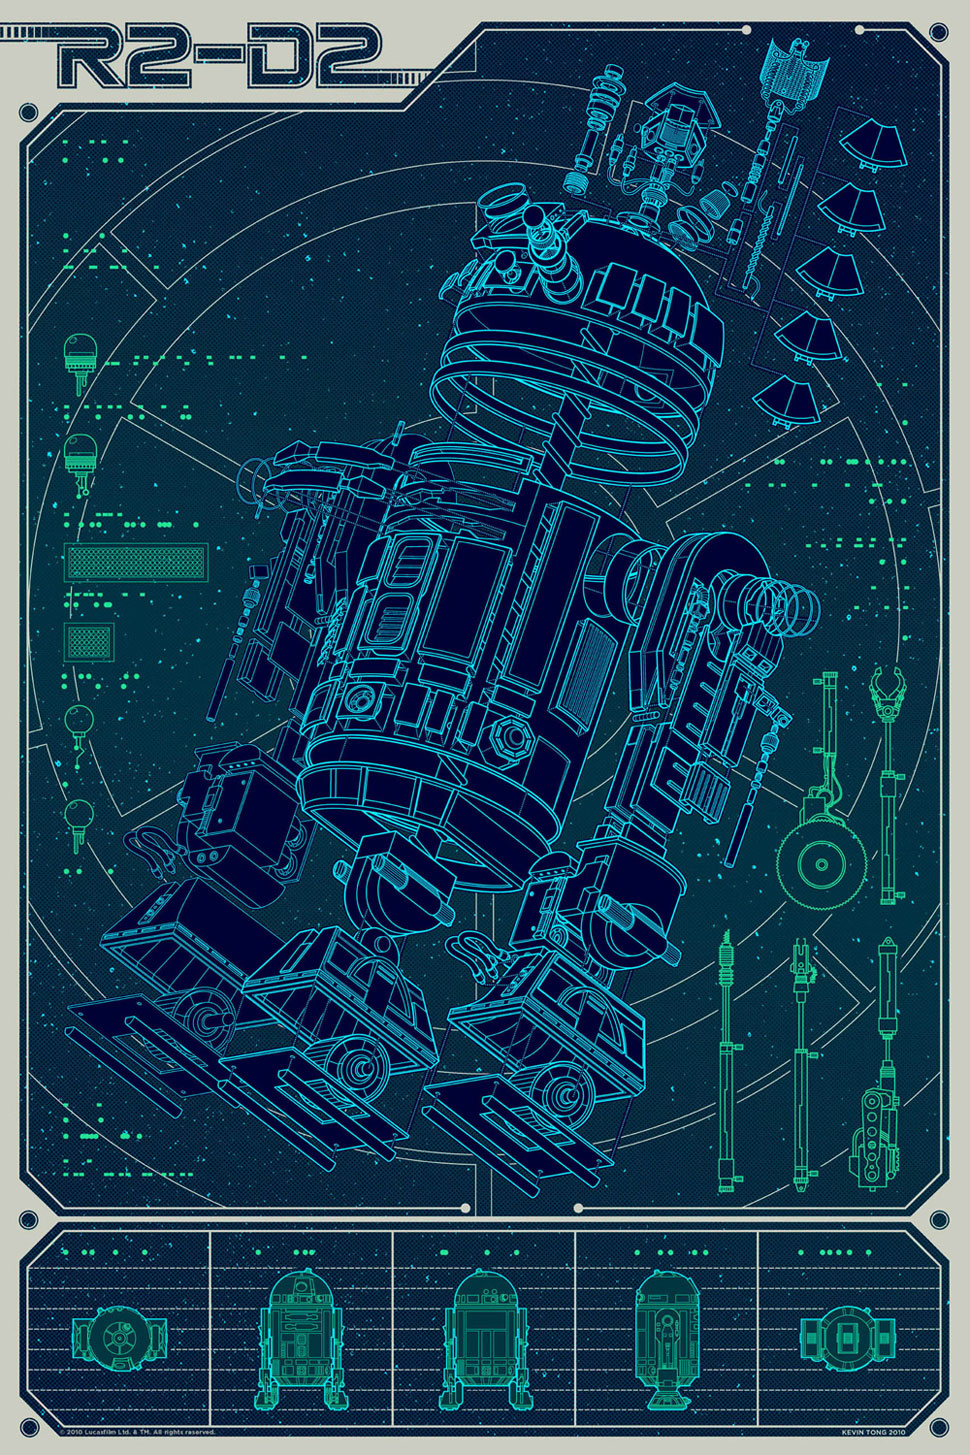 poster featuring an exploded view of parts for r2d2 from star wars